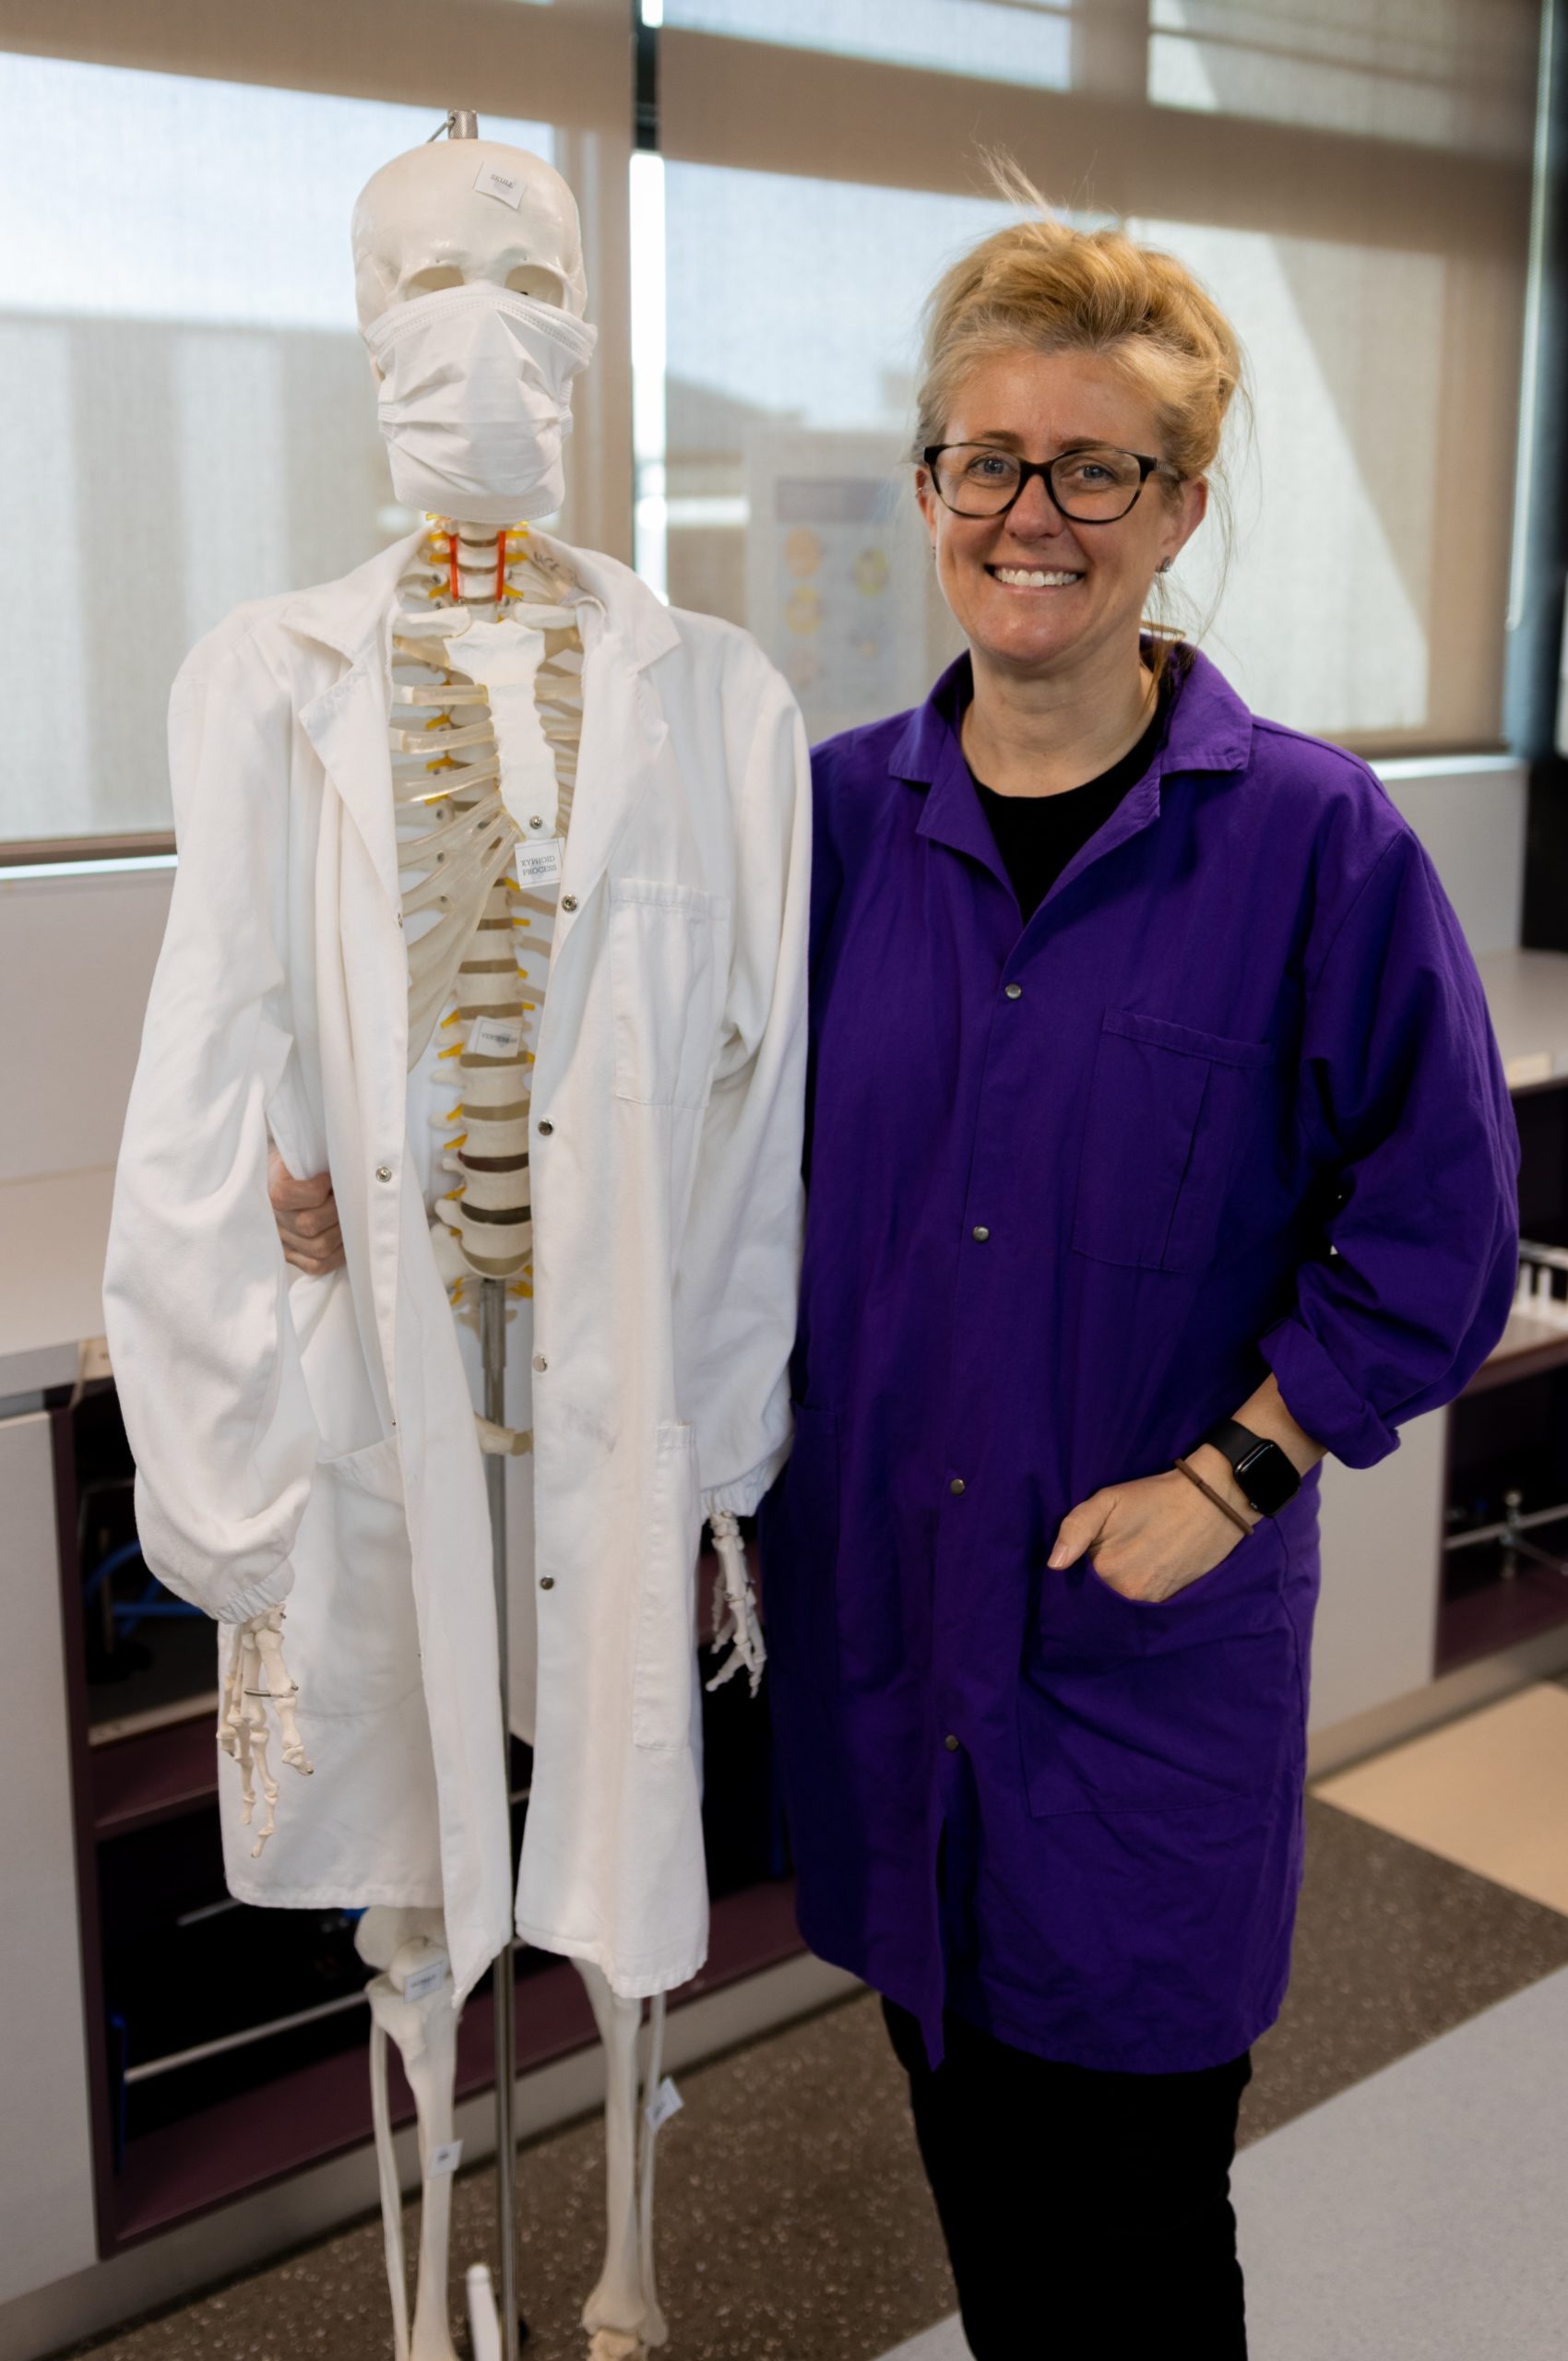 STEM teacher Kylee Townsend in the classroom with a model skeleton.